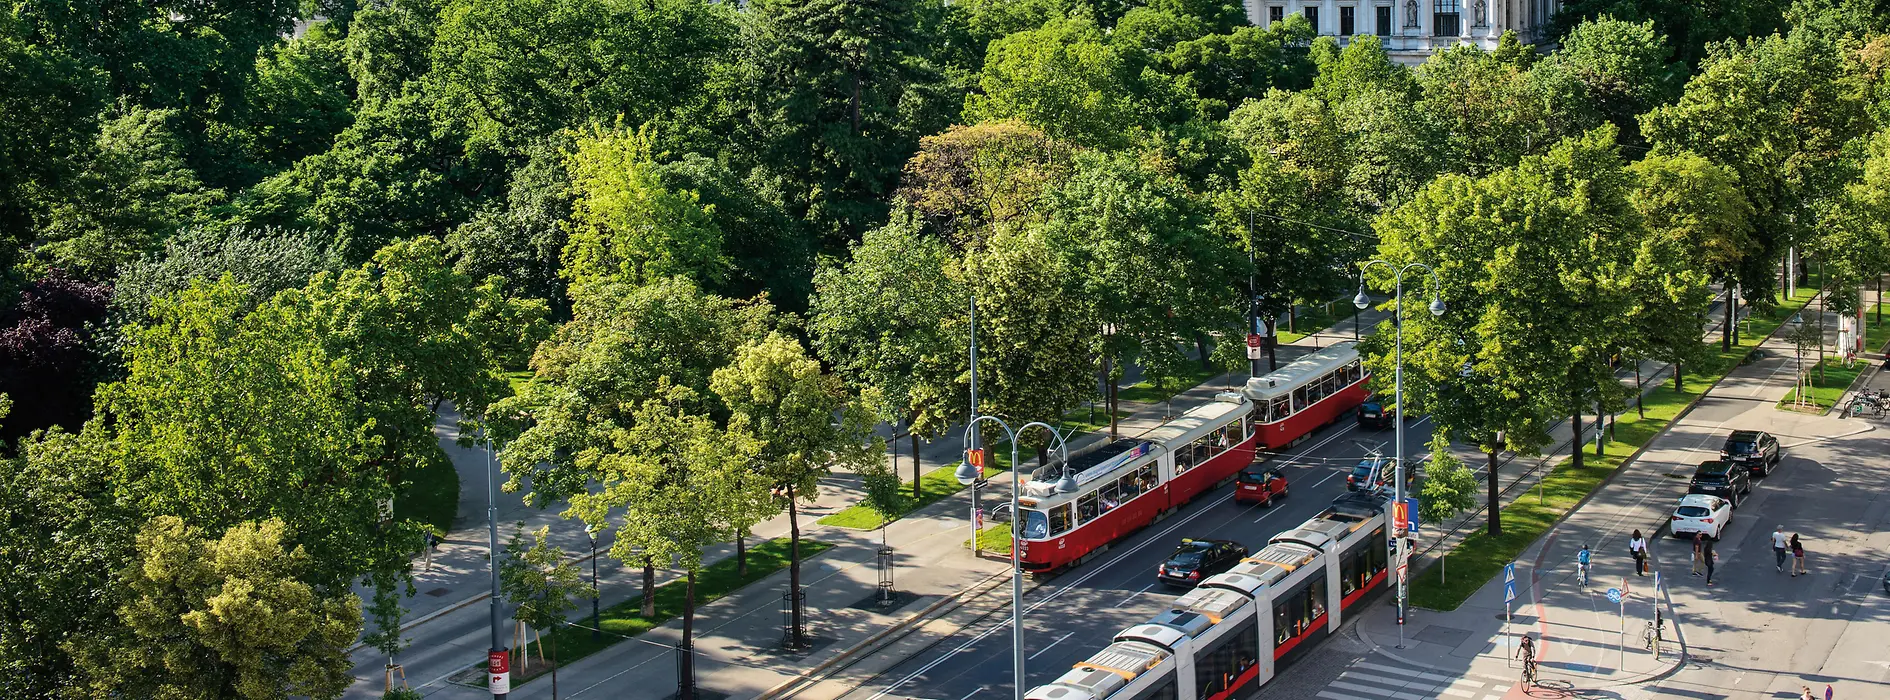 Trams at the Ringstrasse